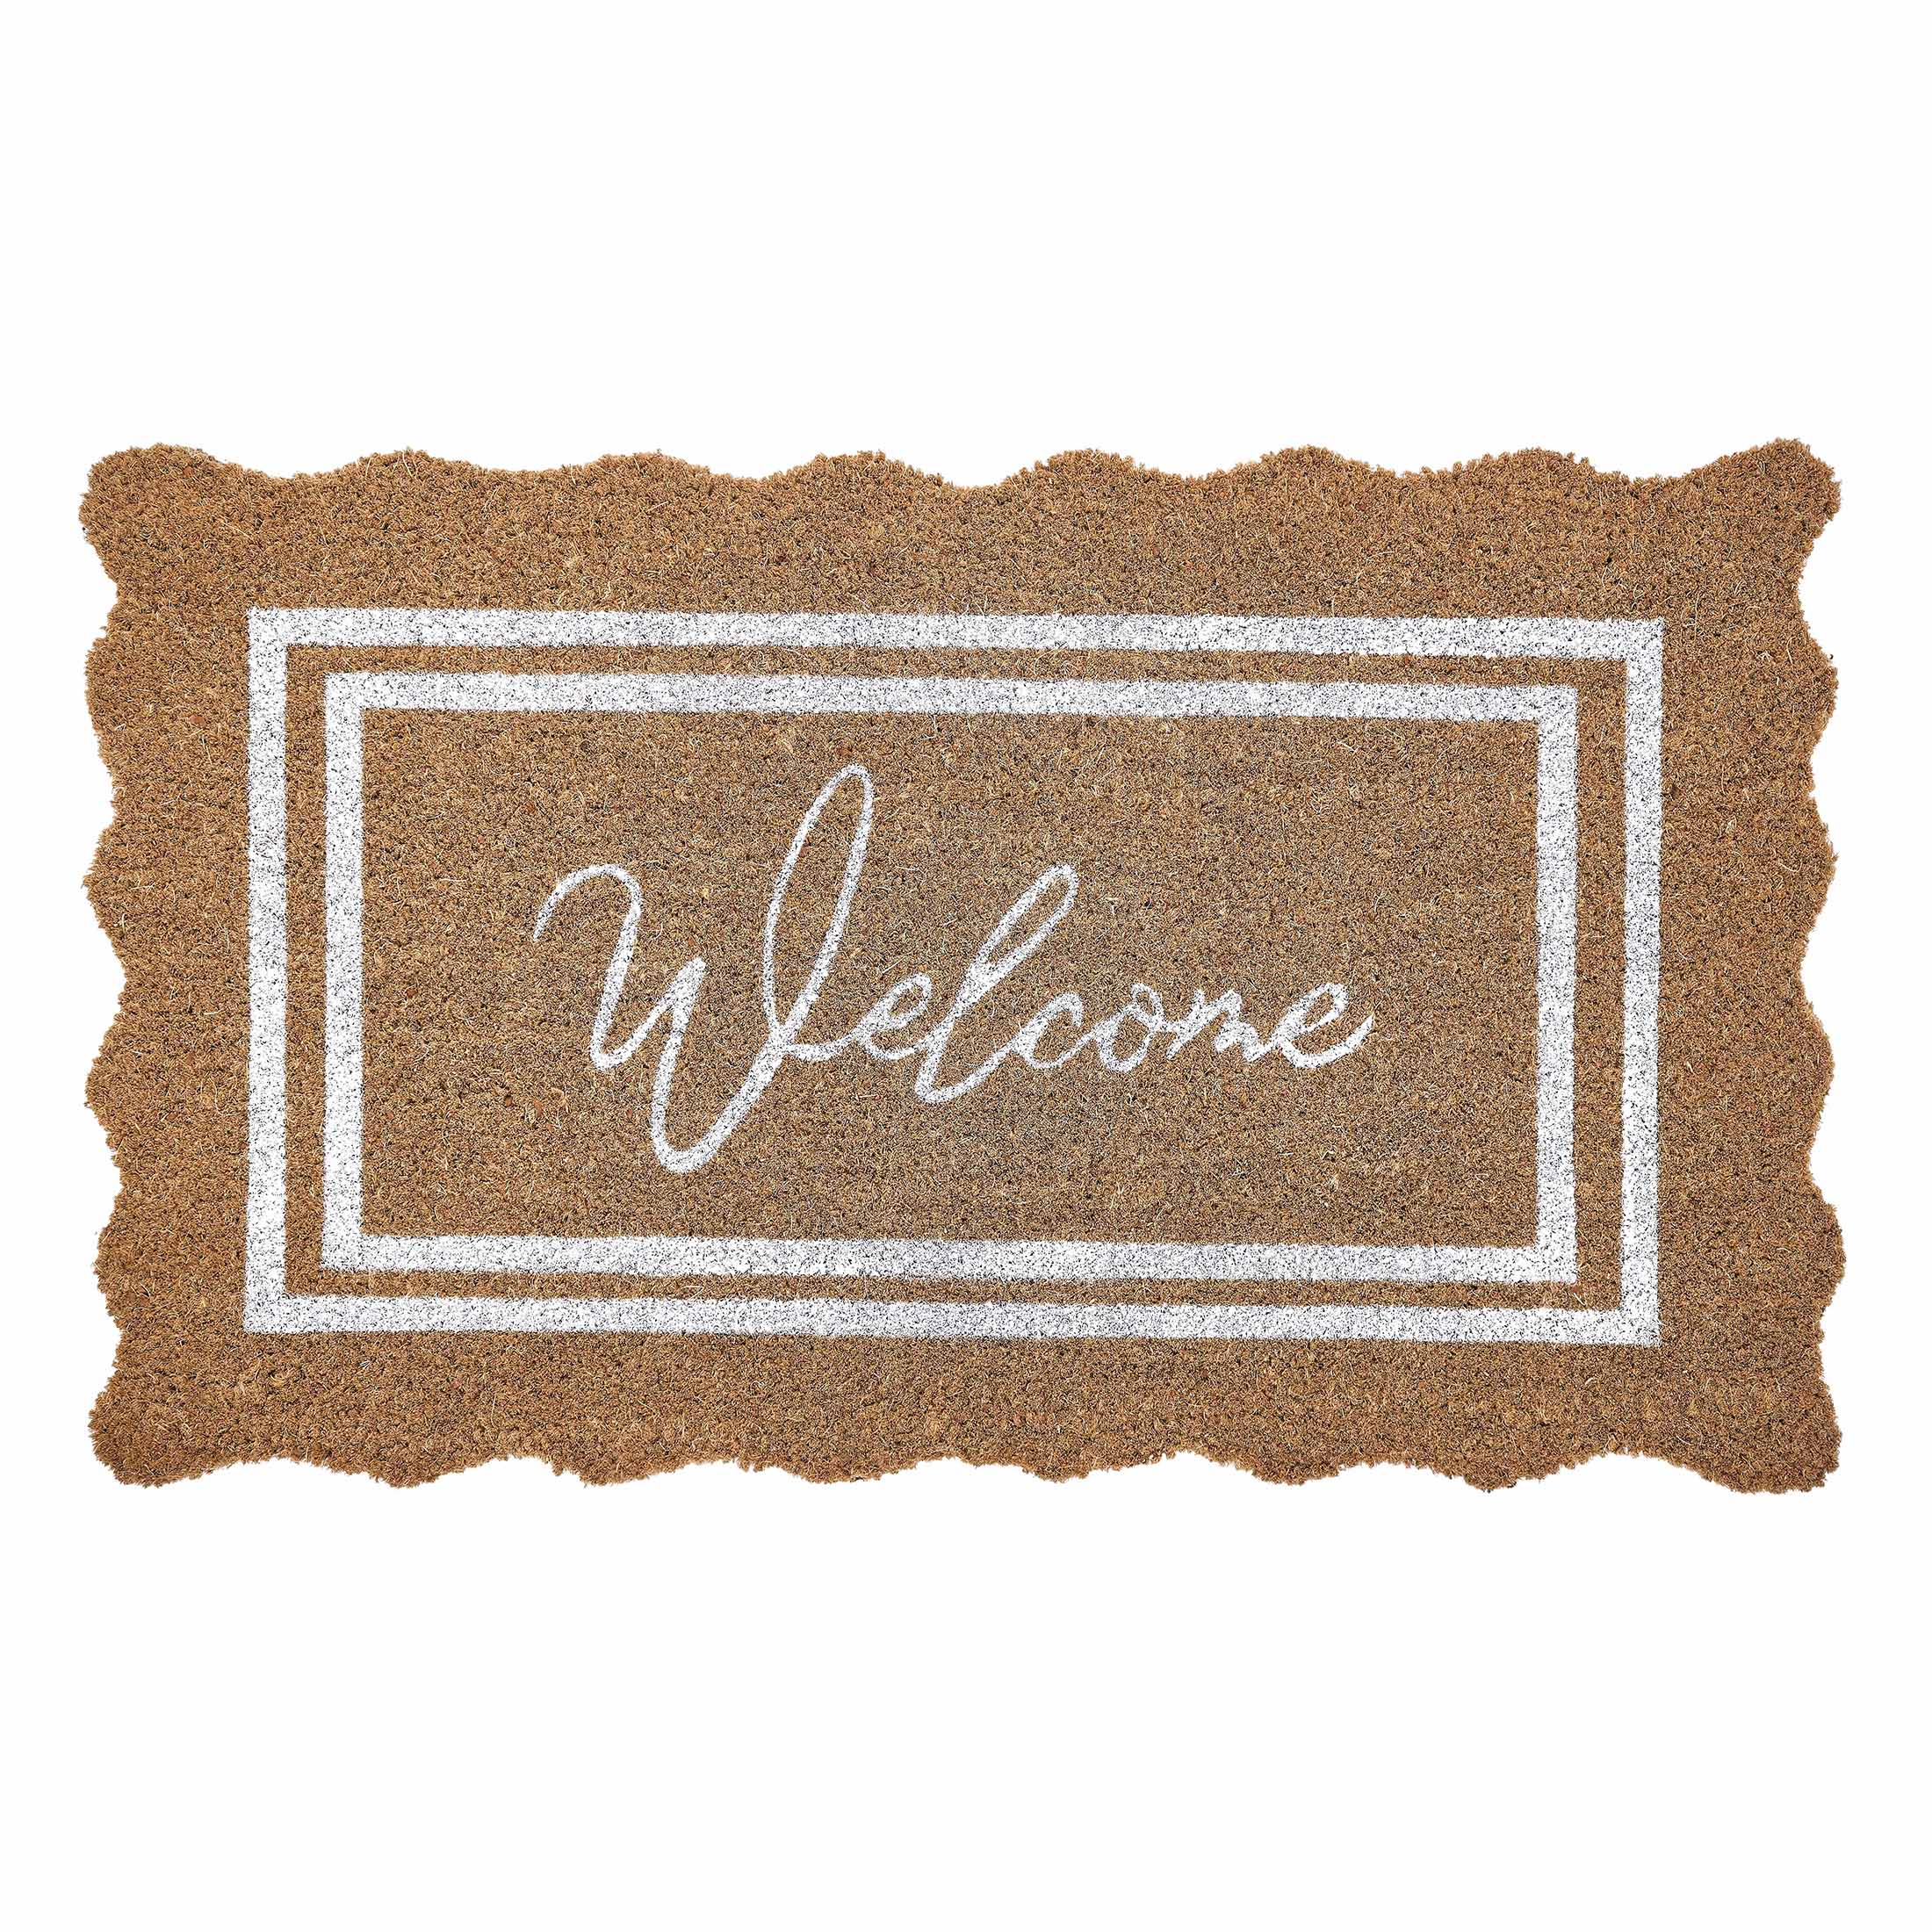 My Texas House Welcome Natural Scalloped Edge and Border Outdoor Coir Doormat, 18" x 30" - image 1 of 7